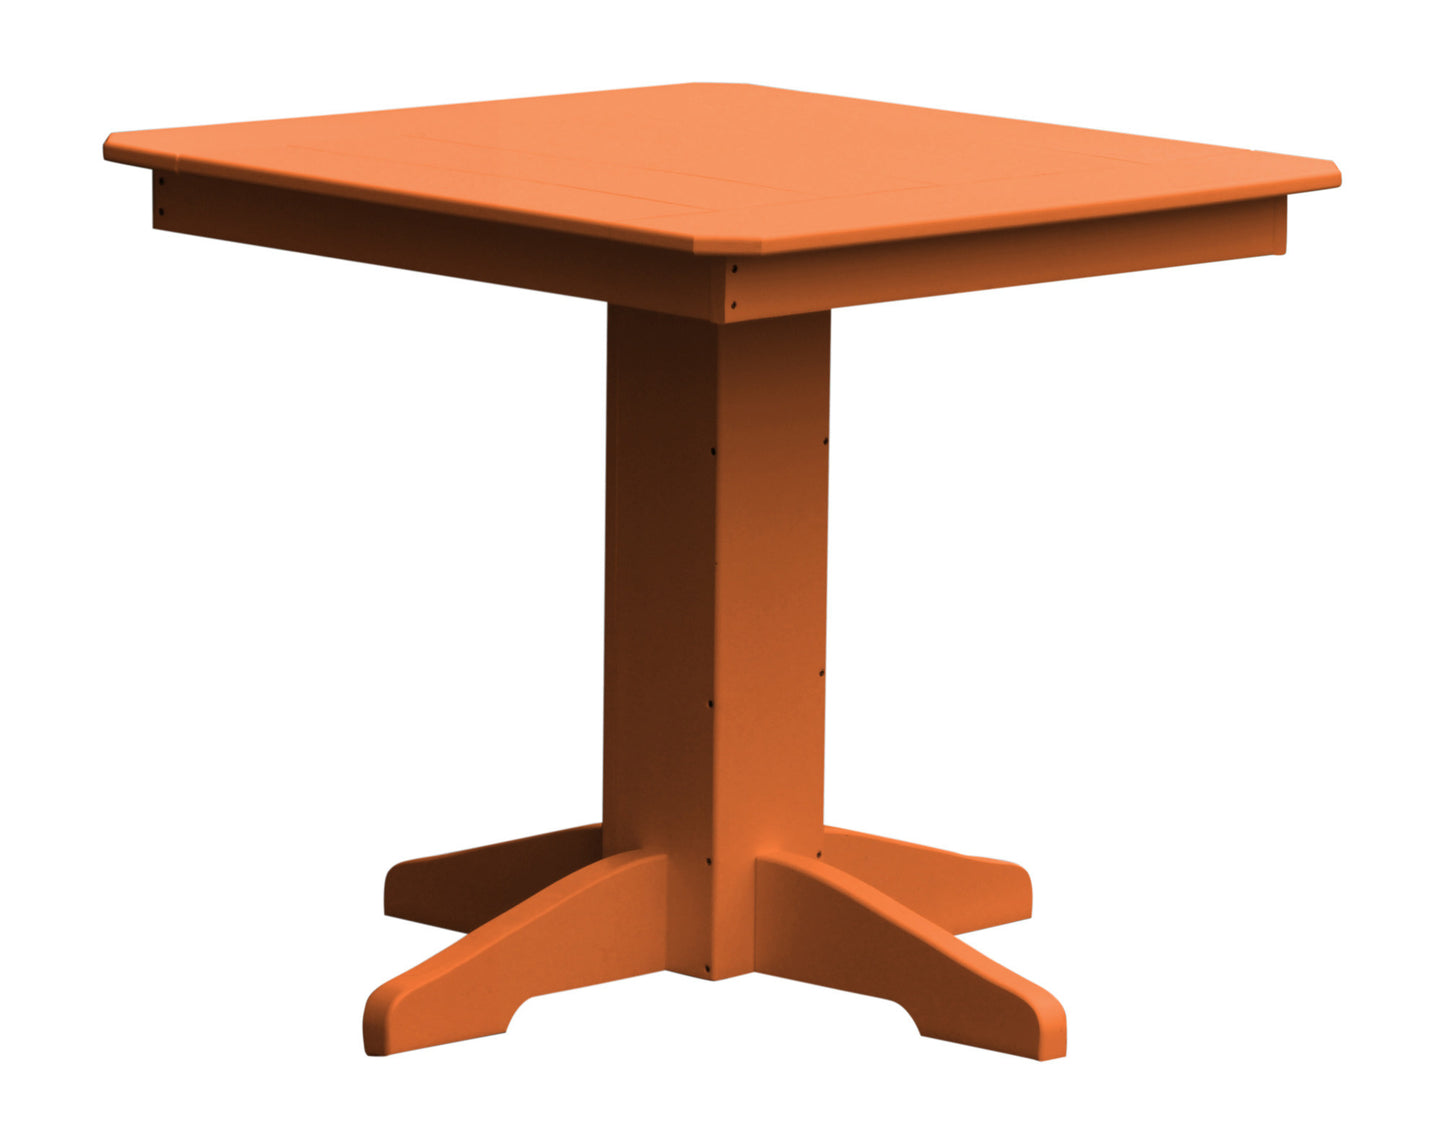 A&L Furniture Recycled Plastic 33" Square Dining Table - Orange